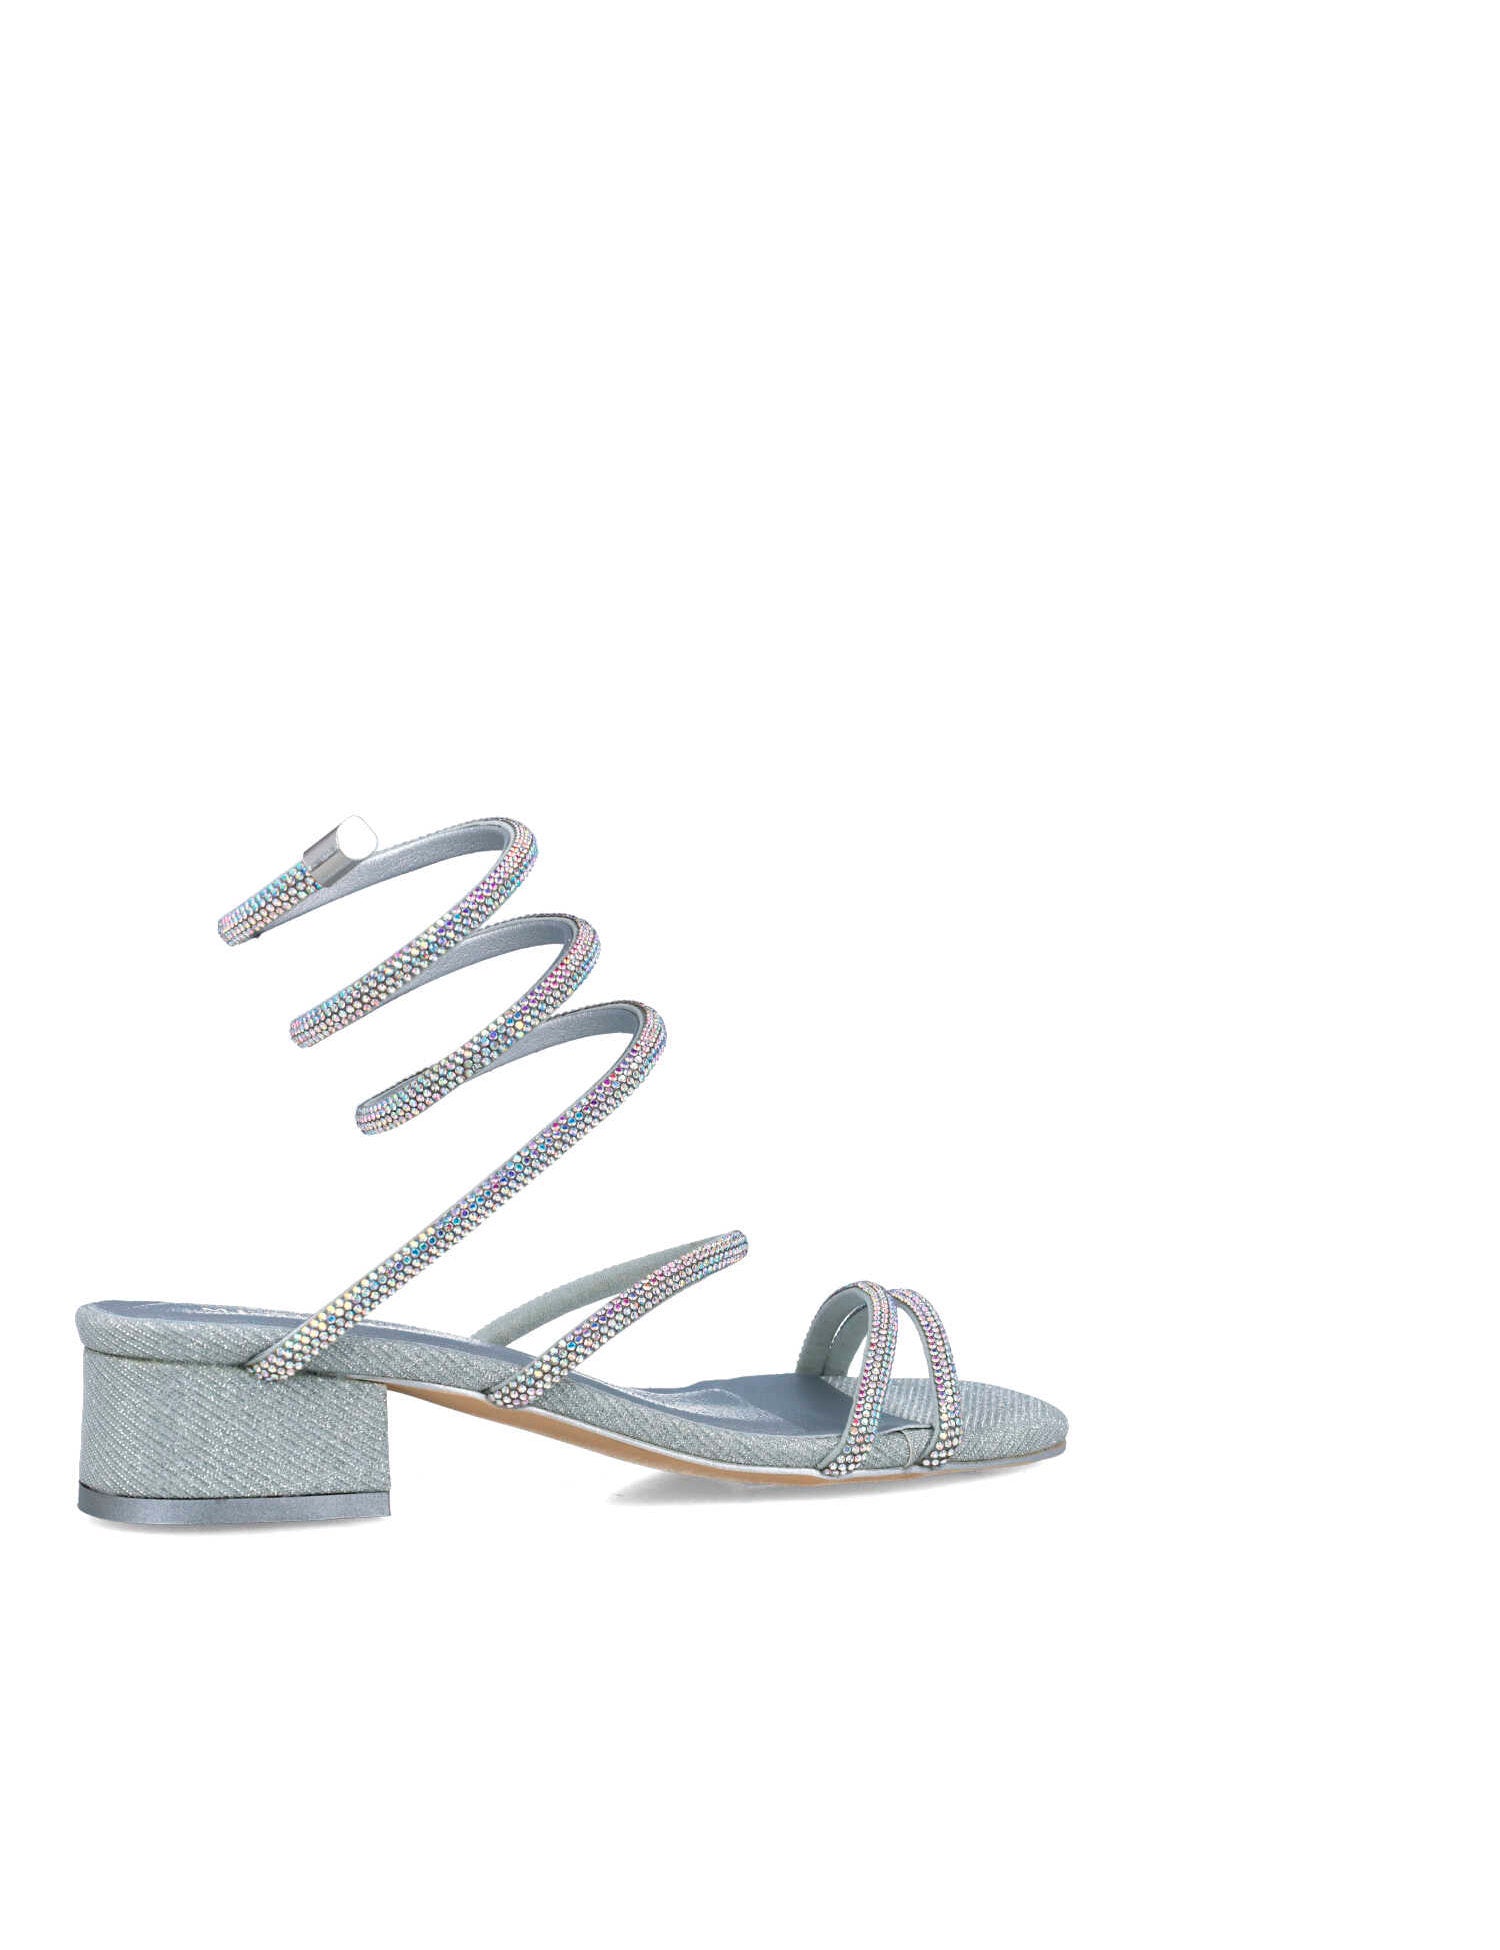 Silver Slippers With Embellished Wrap Strap_24722_09_03